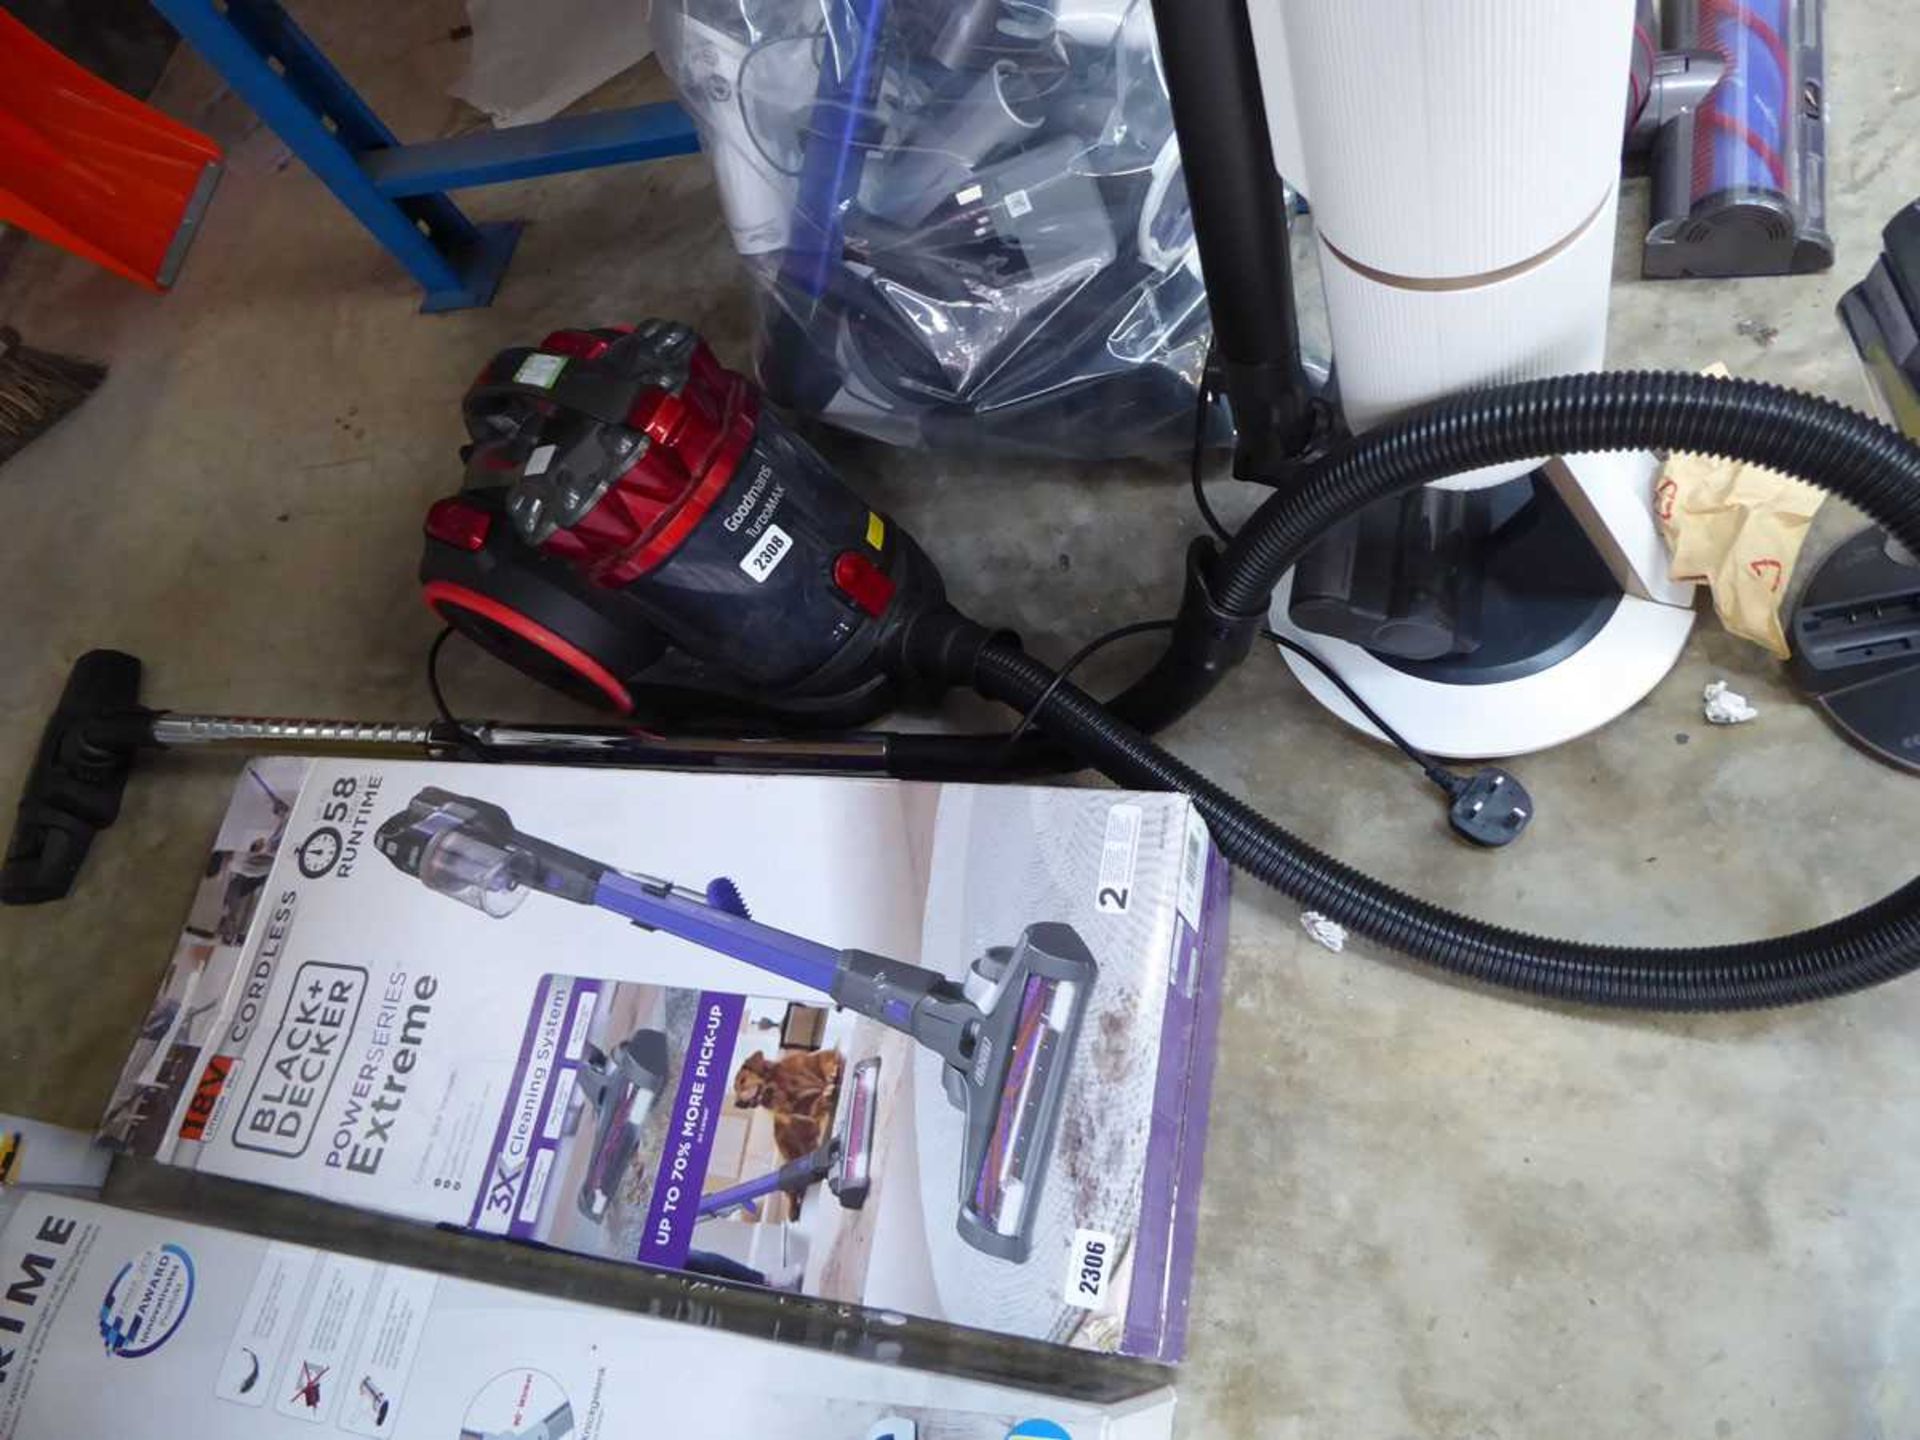 Goodmans Turbo Max cylindrical vacuum cleaner